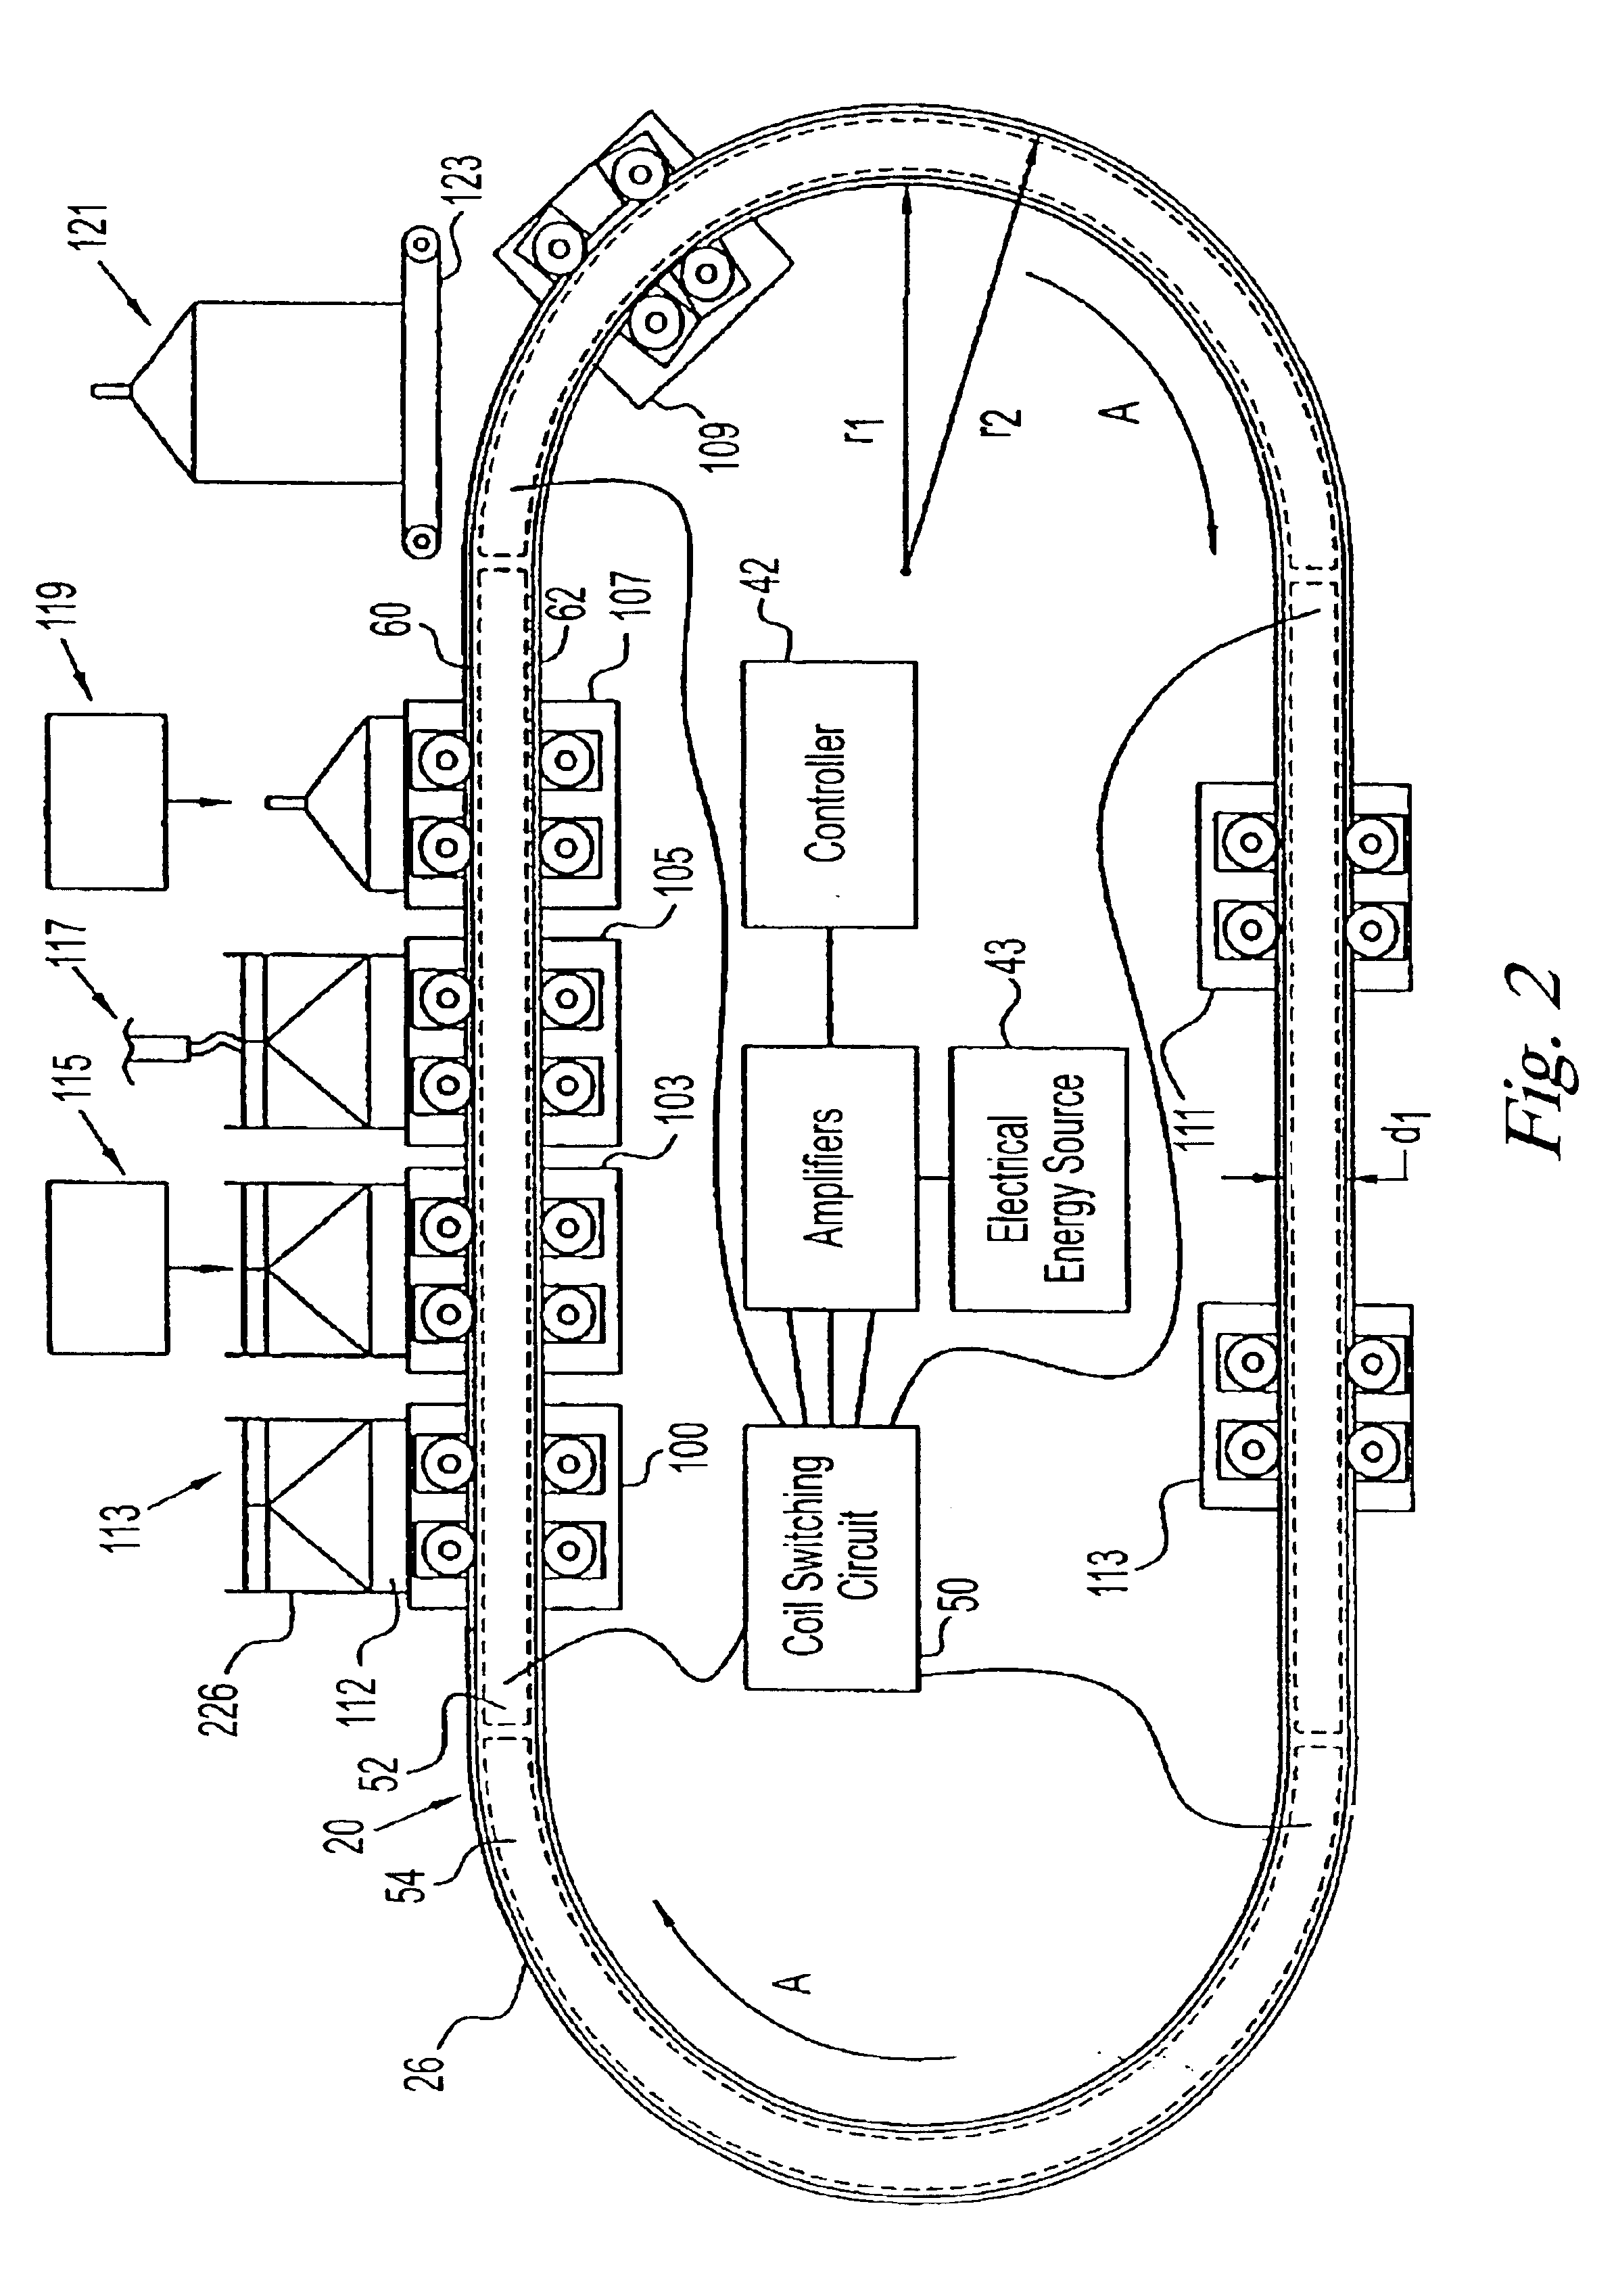 Variable motion system and method